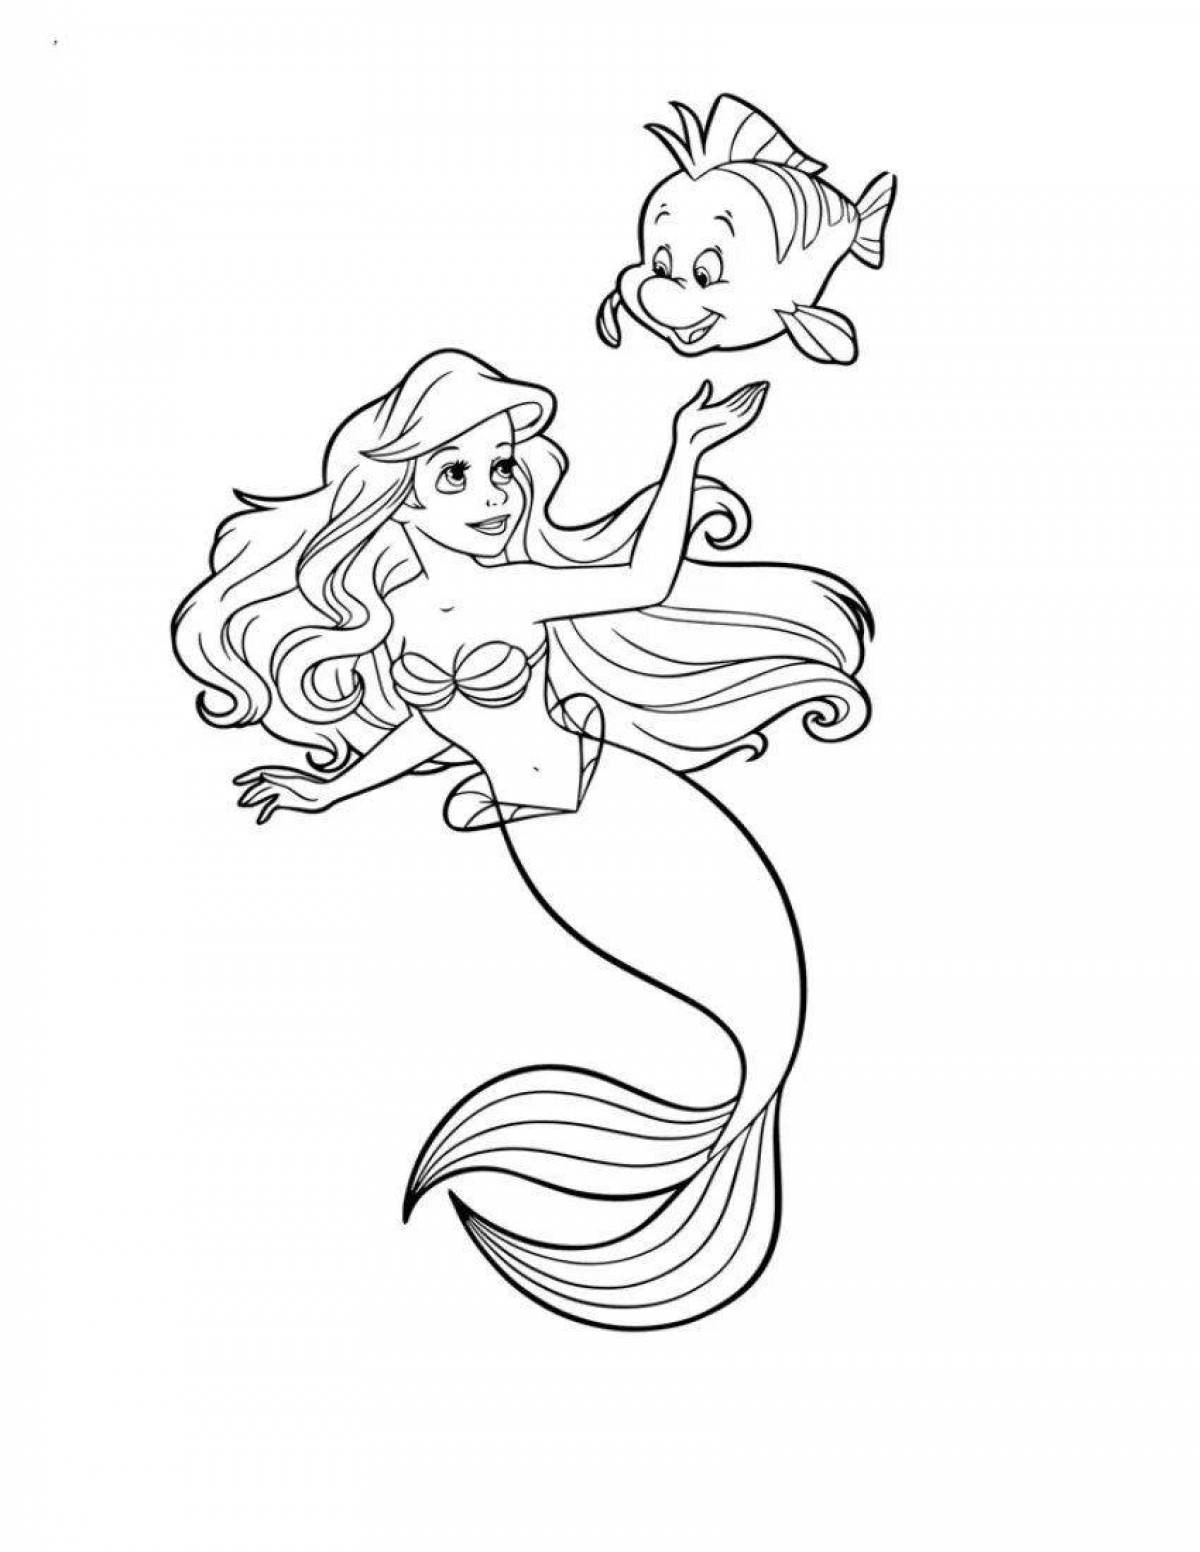 Fairy tale coloring mermaid ariel for girls